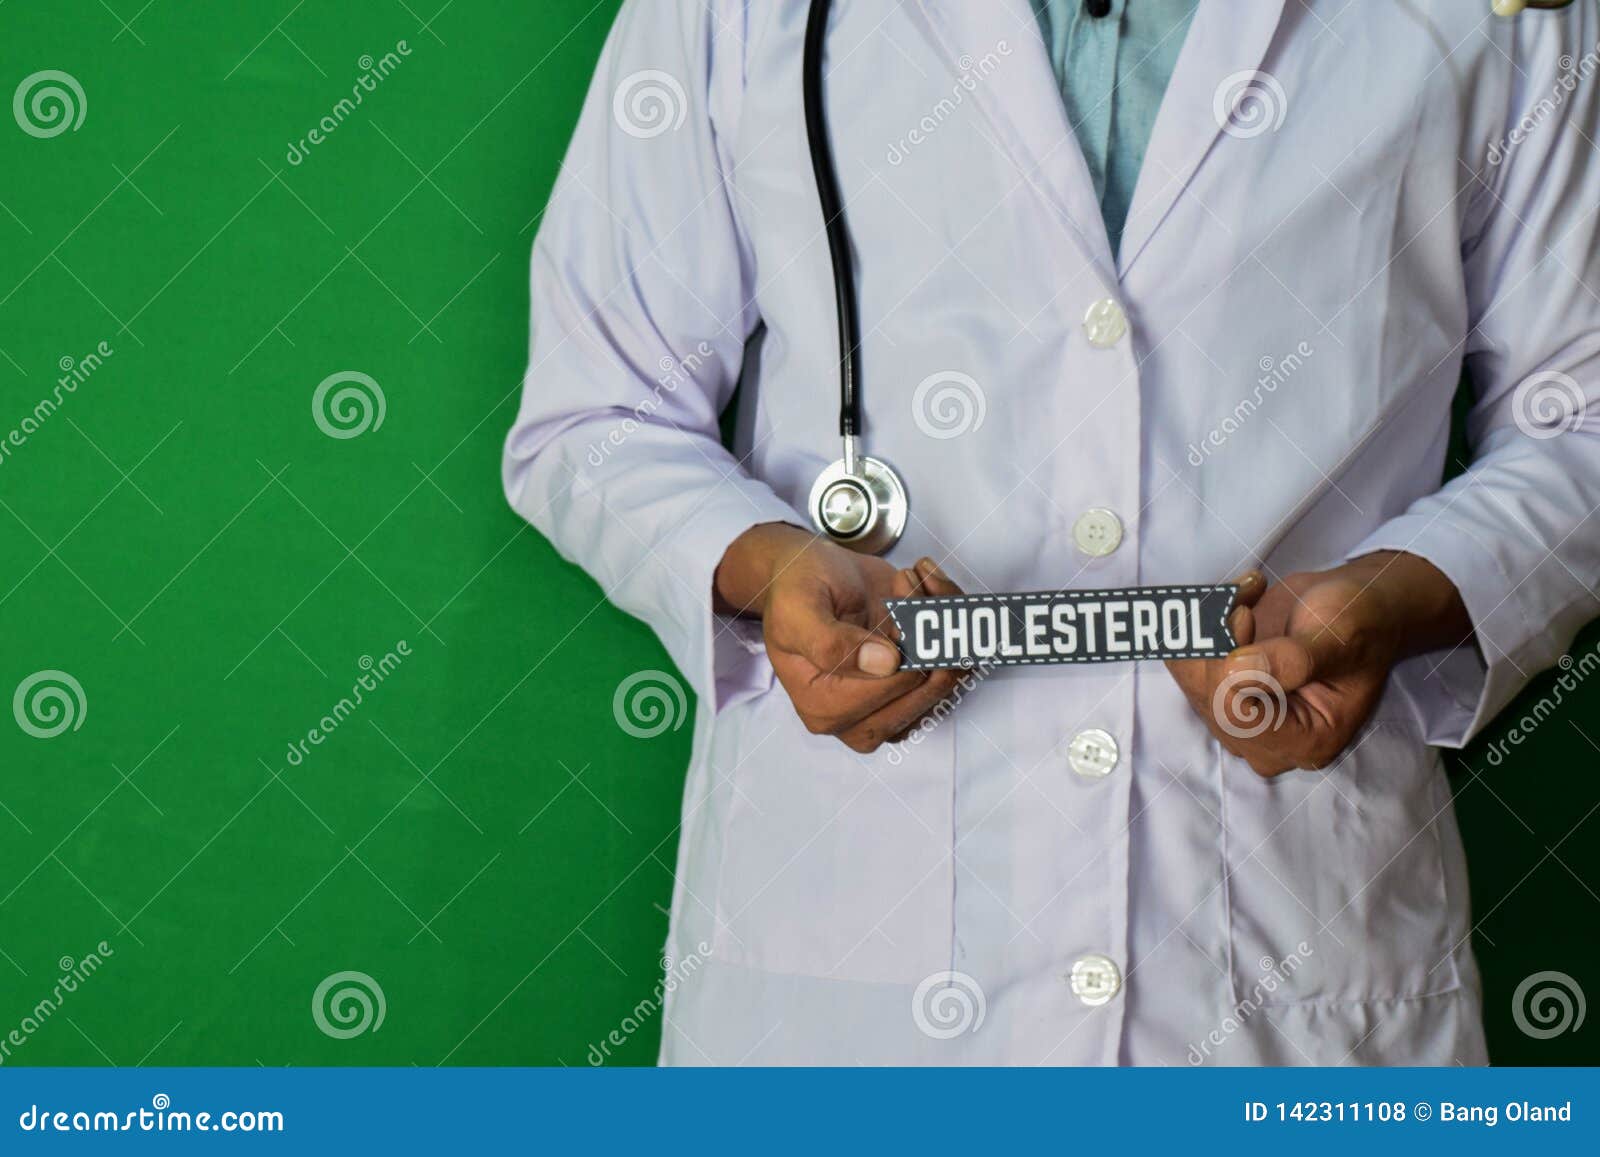 doctor standing on green background. selective focus in hand. high colesterol paper text.